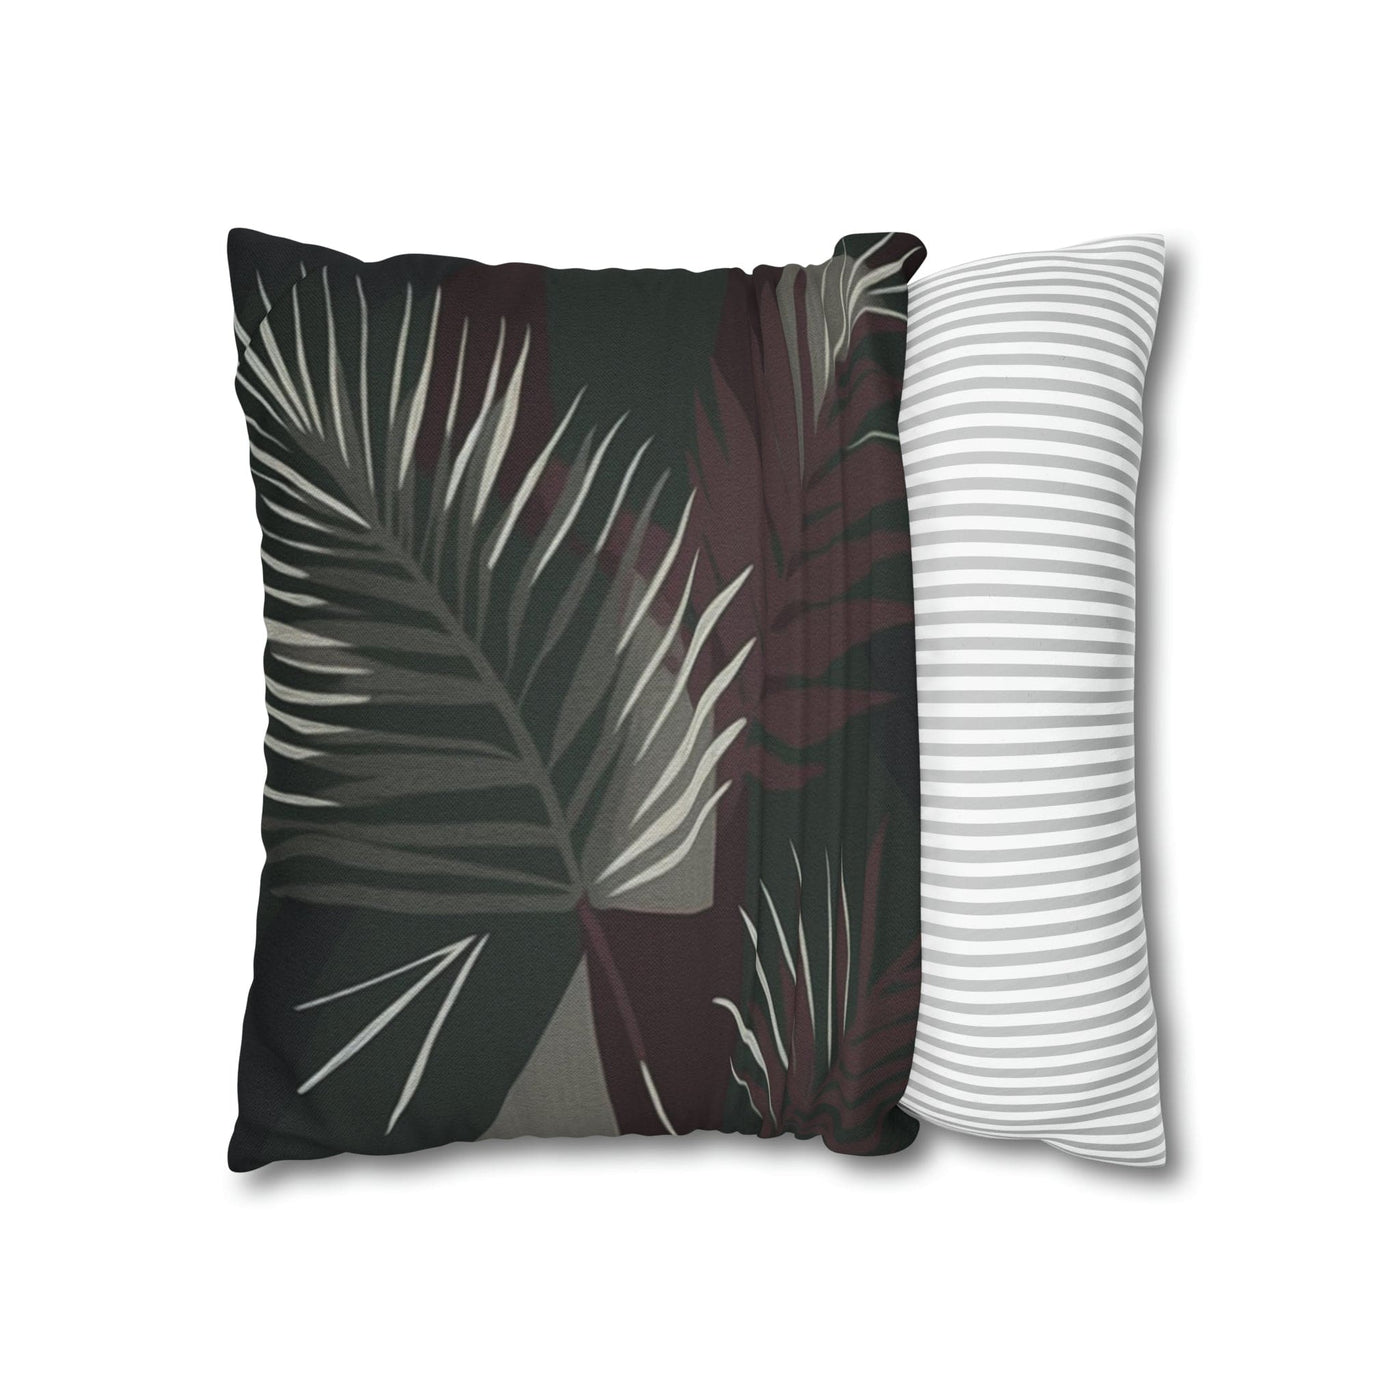 Decorative Throw Pillow Covers With Zipper - Set Of 2 Palm Tree Leaves Maroon